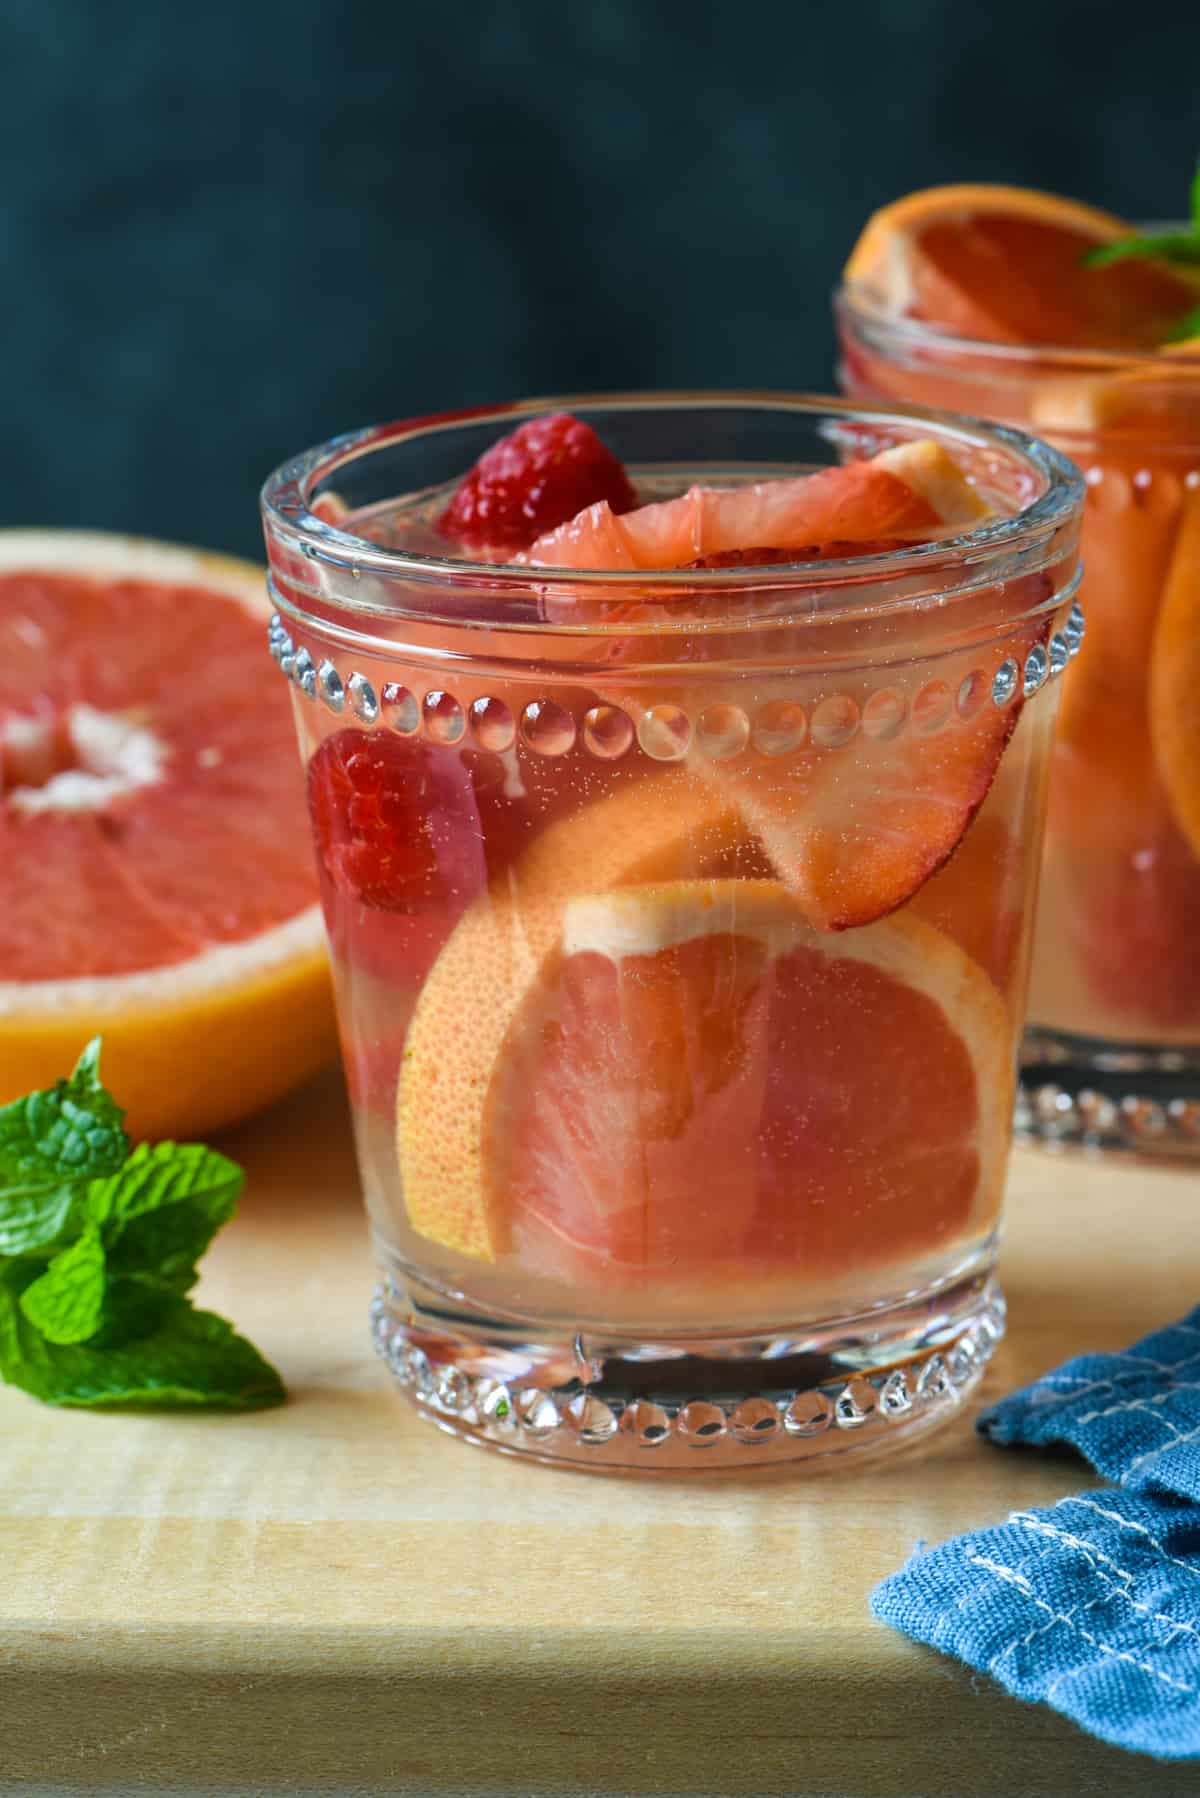 Grapefruit Sangria + 11 Grapefruit Recipes to Brighten Your Winter - Bring some happy flavor to a cold day with an appetizer, cocktail, breakfast, salad, lunch or dinner celebrating juicy, sweet grapefruit! | foxeslovelemons.com